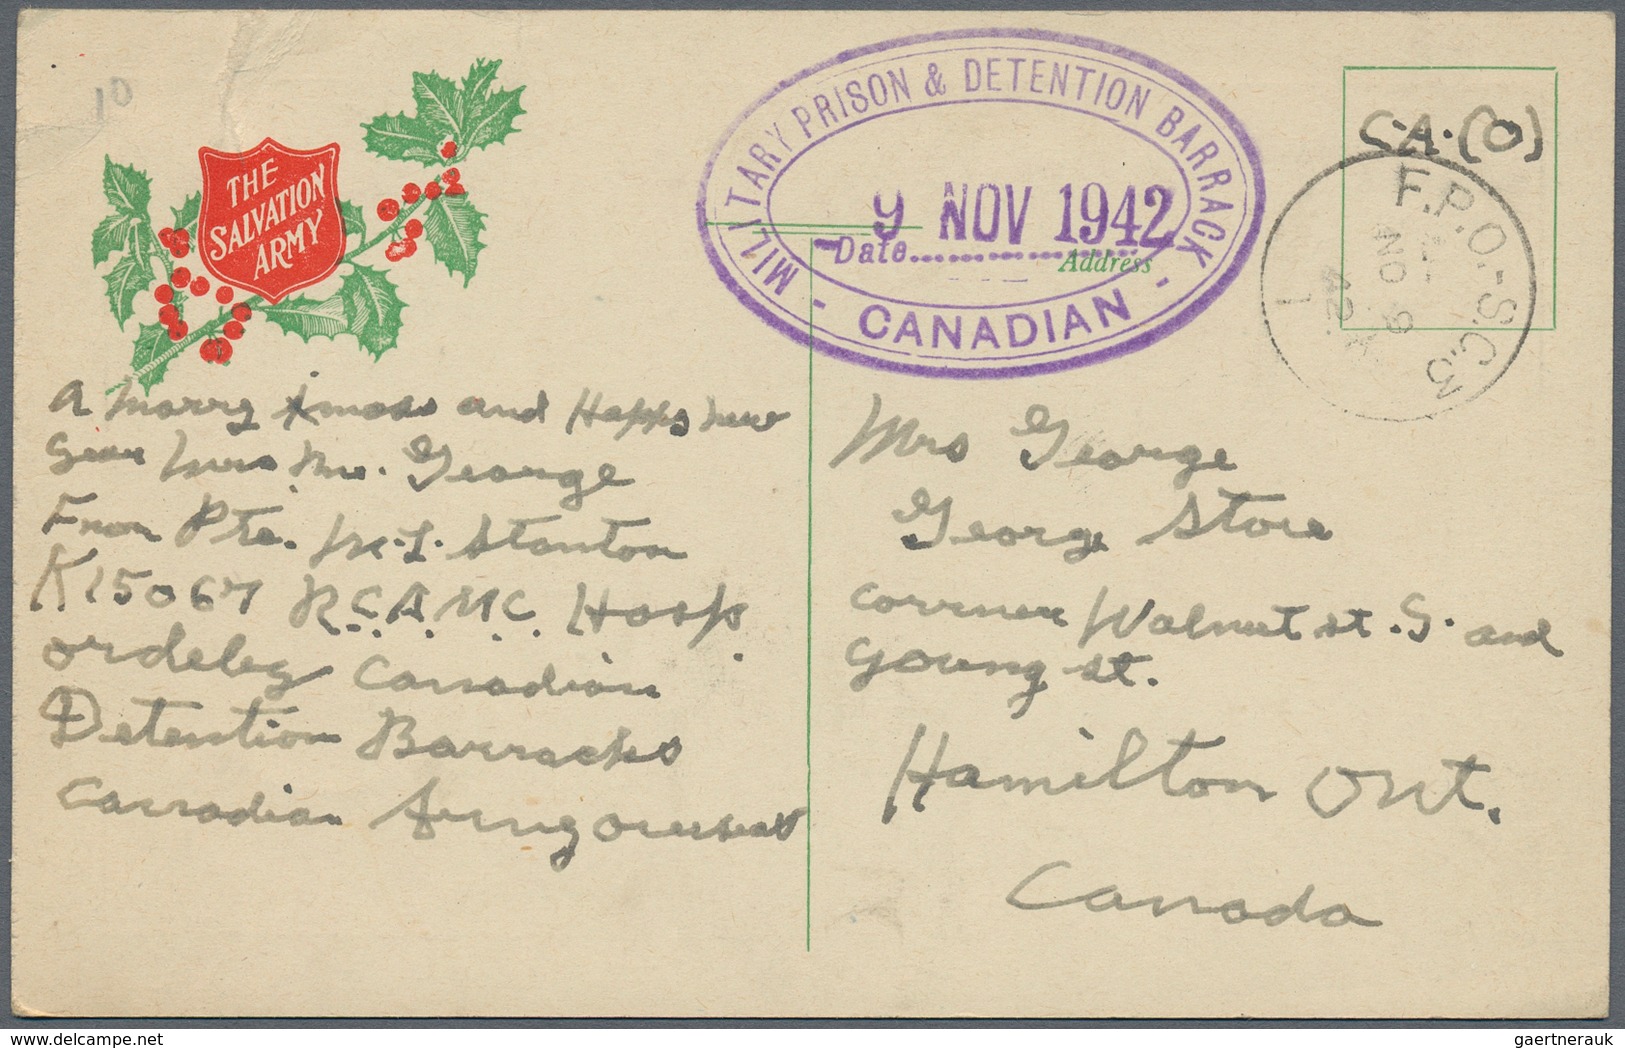 Kanada: 1941/54 (ca.) holding of about 670 letters and cards of prisoners of war and the field post,